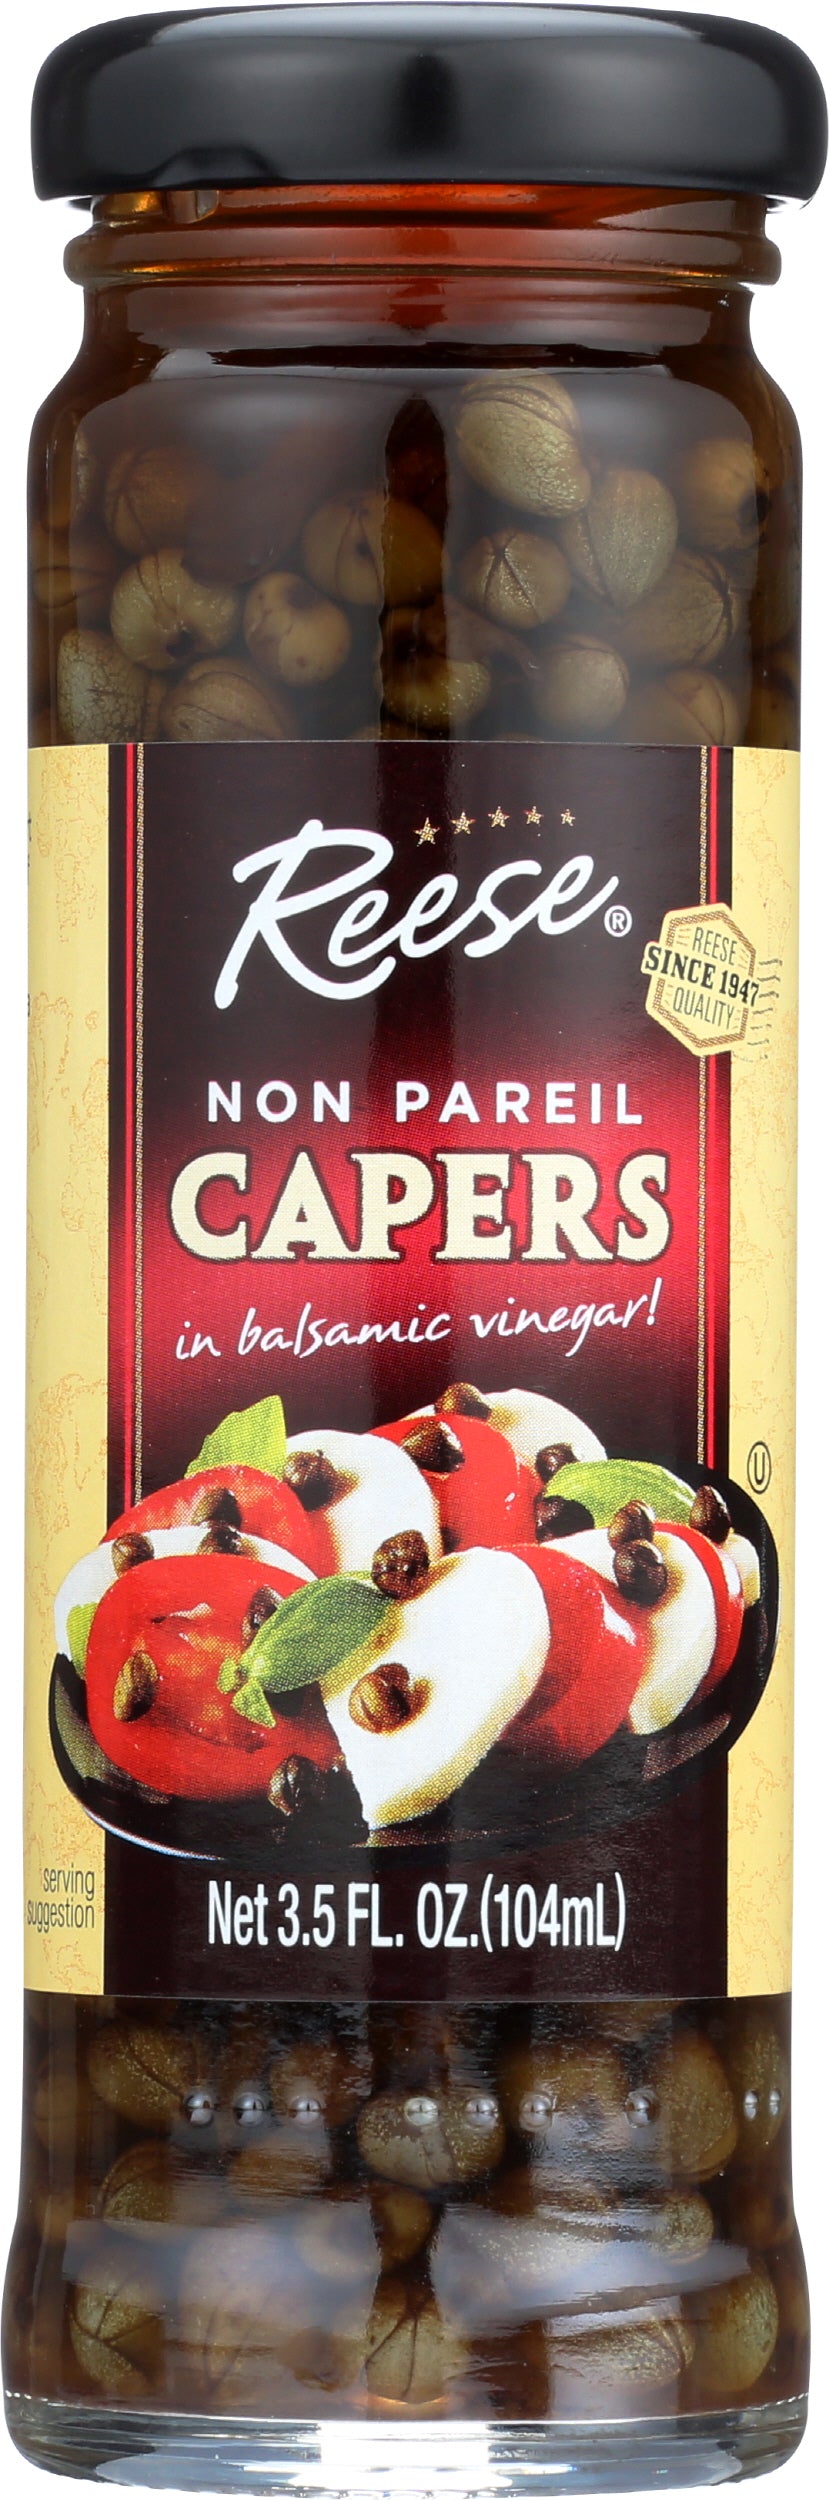 Reese Balsamic Vinegar Non Pareil Capers, 3.5 OZ (Pack of 12)